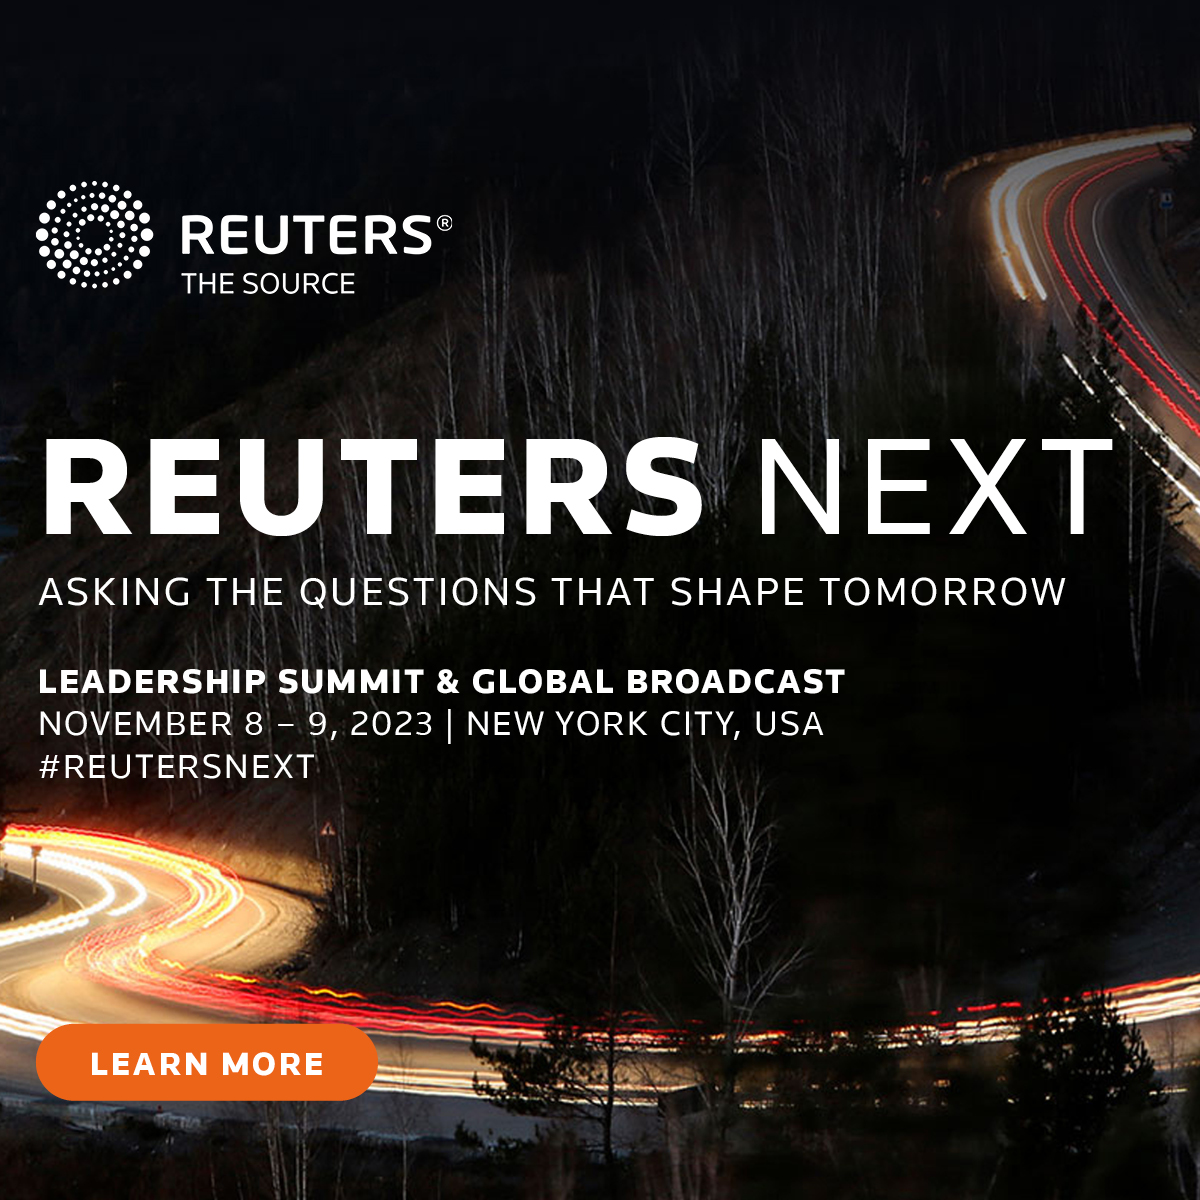 Reuters NEXT (NYC, Nov 8-9) is where Executive Teams from Global 500 companies come together alongside government to discuss, ideate, and share solutions both on and off the record. View confirmed attendee sample here: 1.reutersevents.com/LP=35870